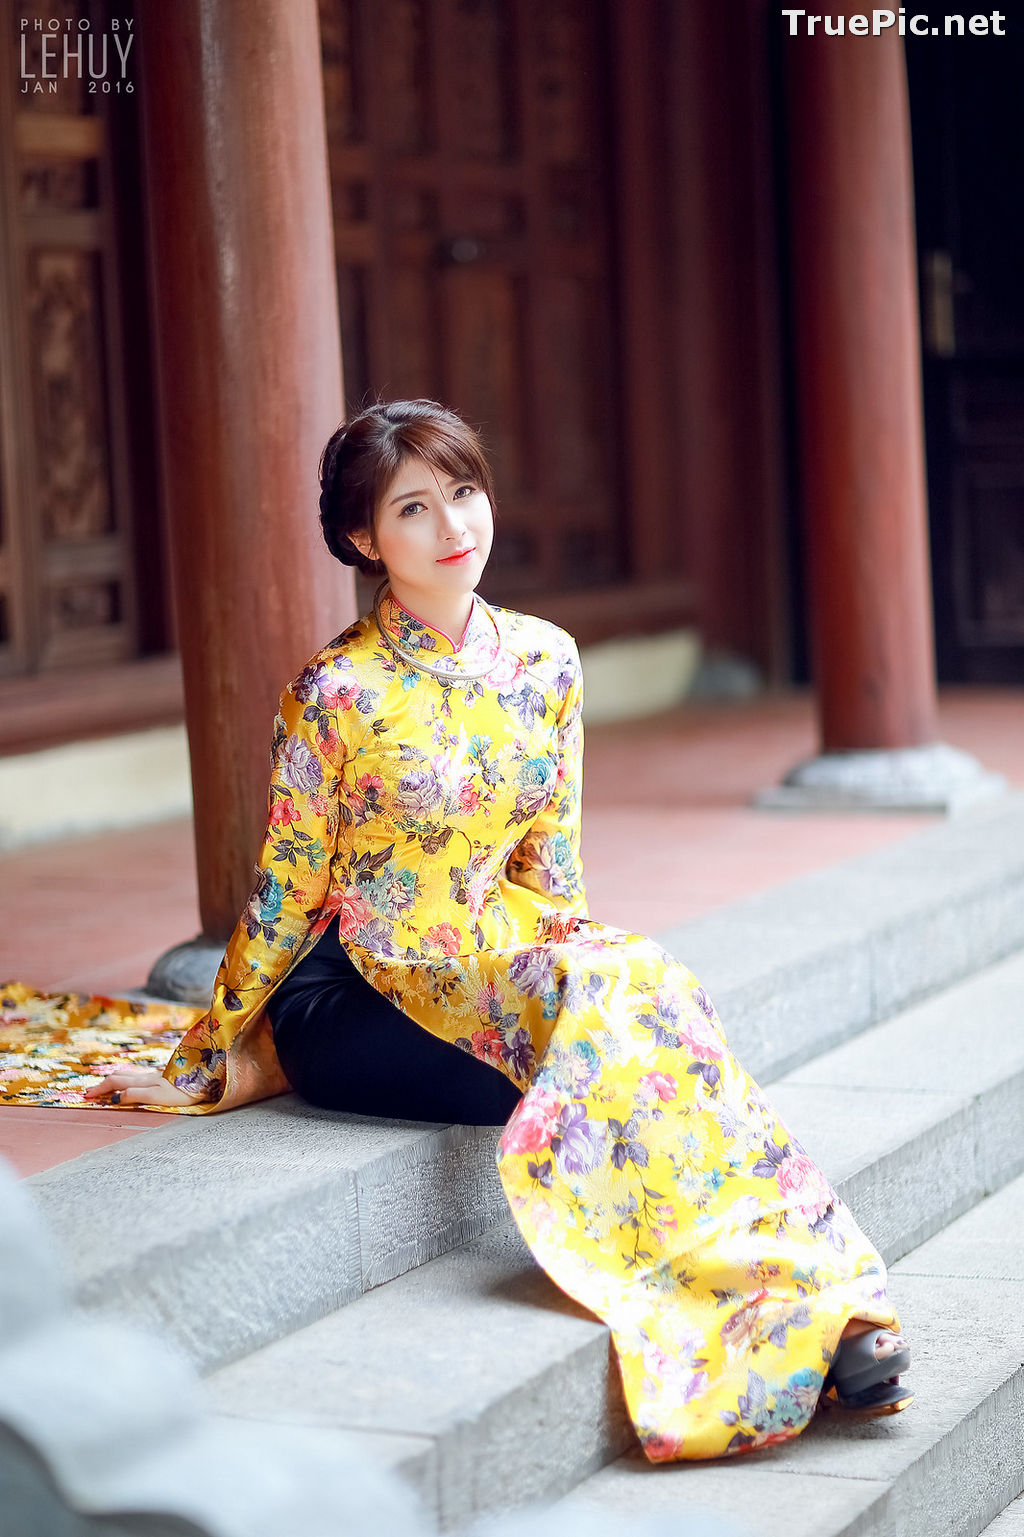 Image The Beauty of Vietnamese Girls with Traditional Dress (Ao Dai) #5 - TruePic.net - Picture-67